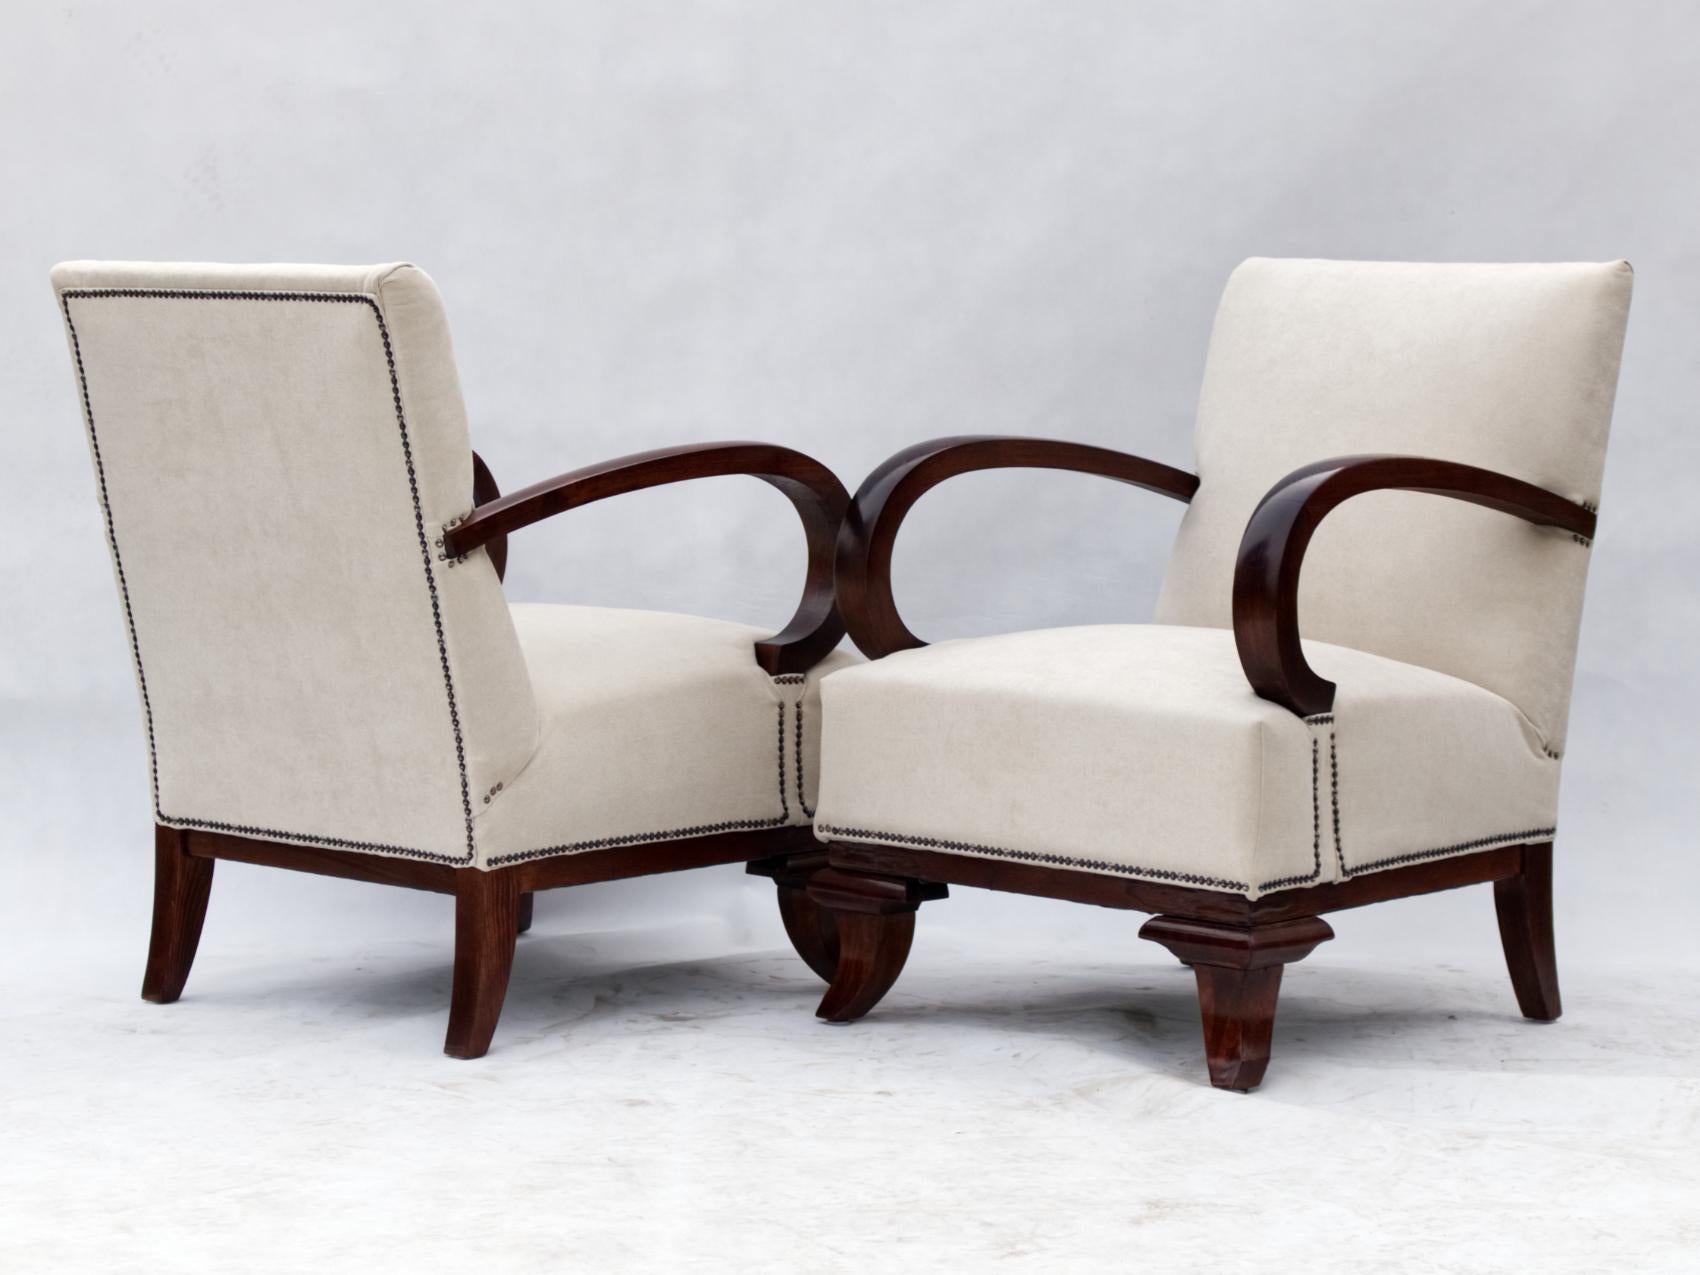 Hungarian Pair of Art Deco Armchairs, Fully Restored Attributed to Lajos Kozma, 1922